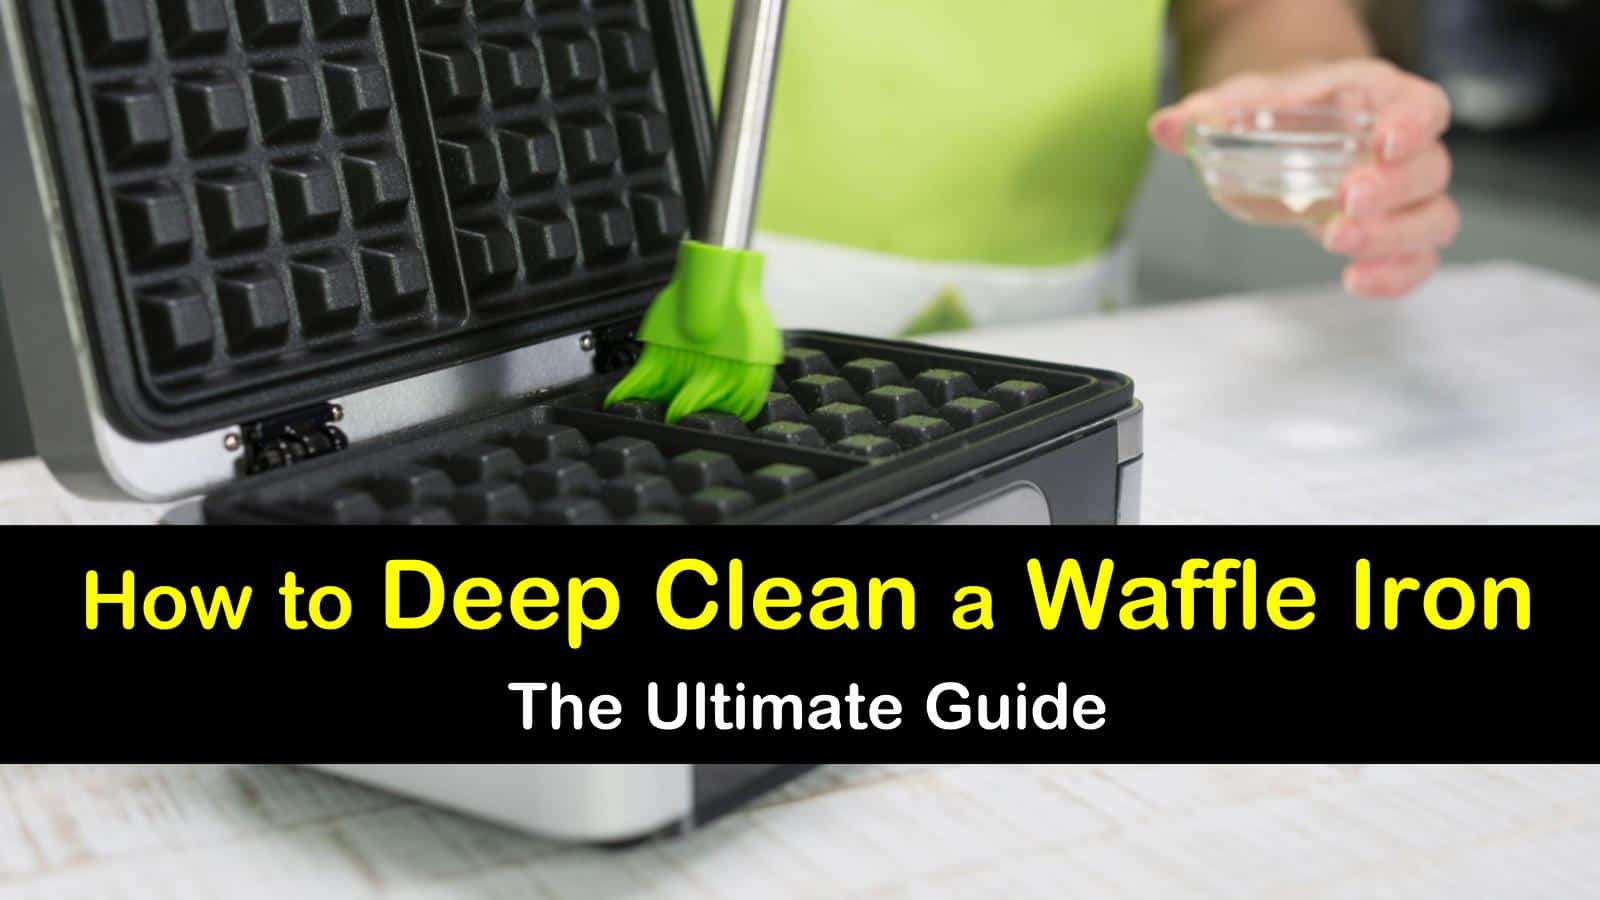 12+ Brilliant Ways to Deep Clean a Waffle Iron